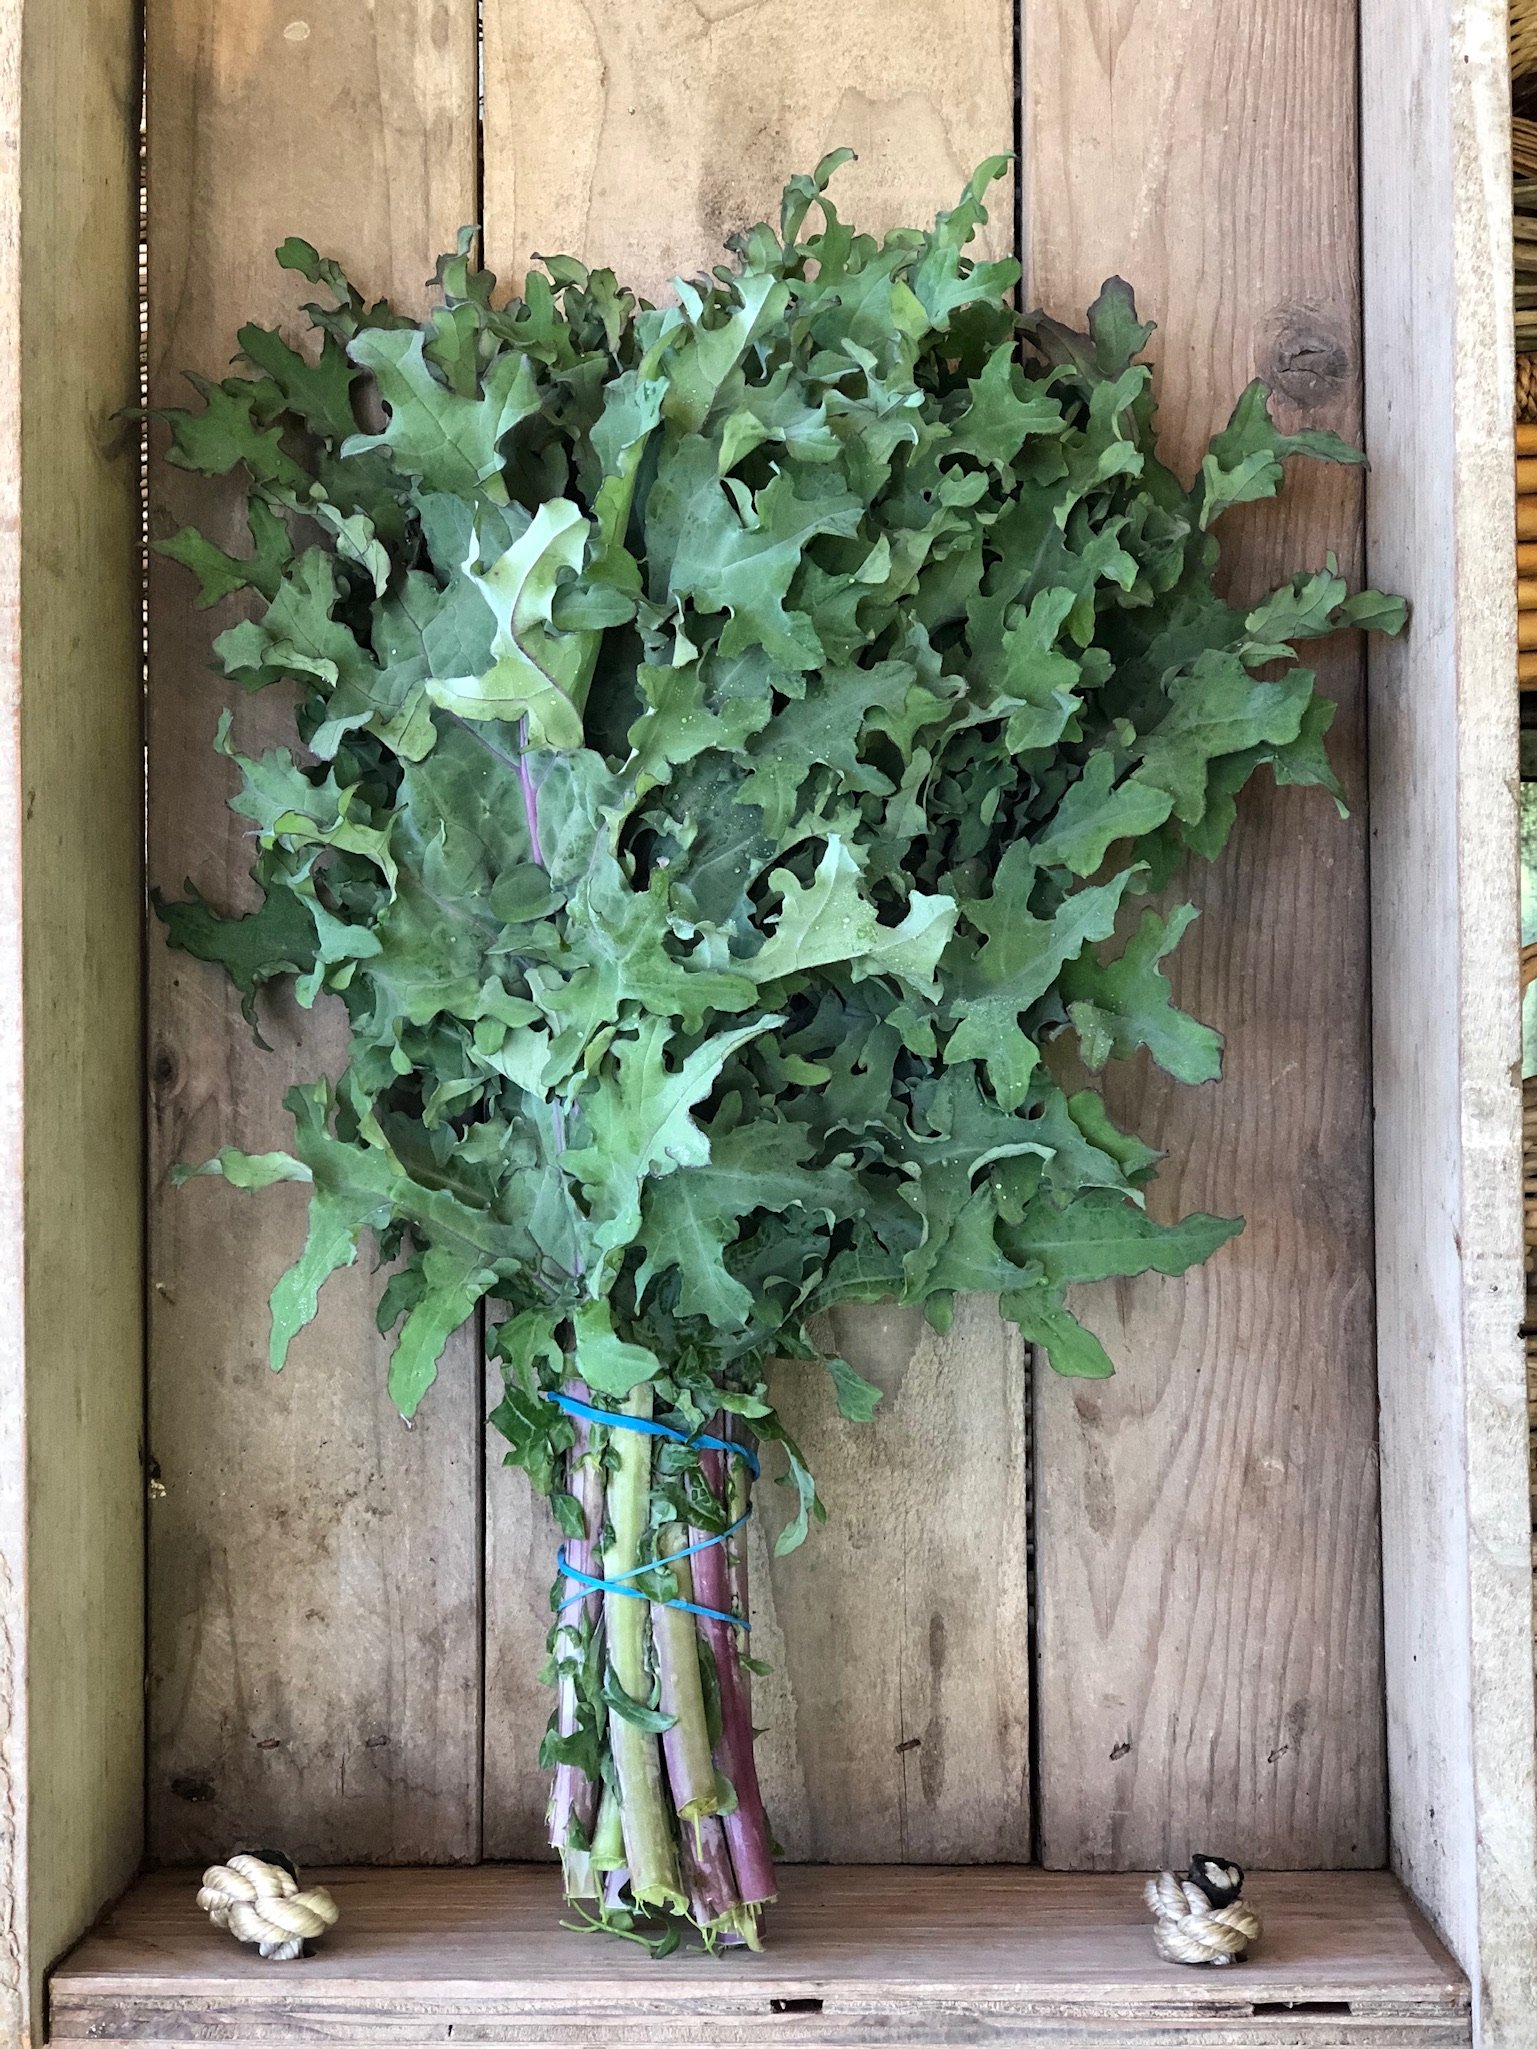 RED RUSSIAN KALE